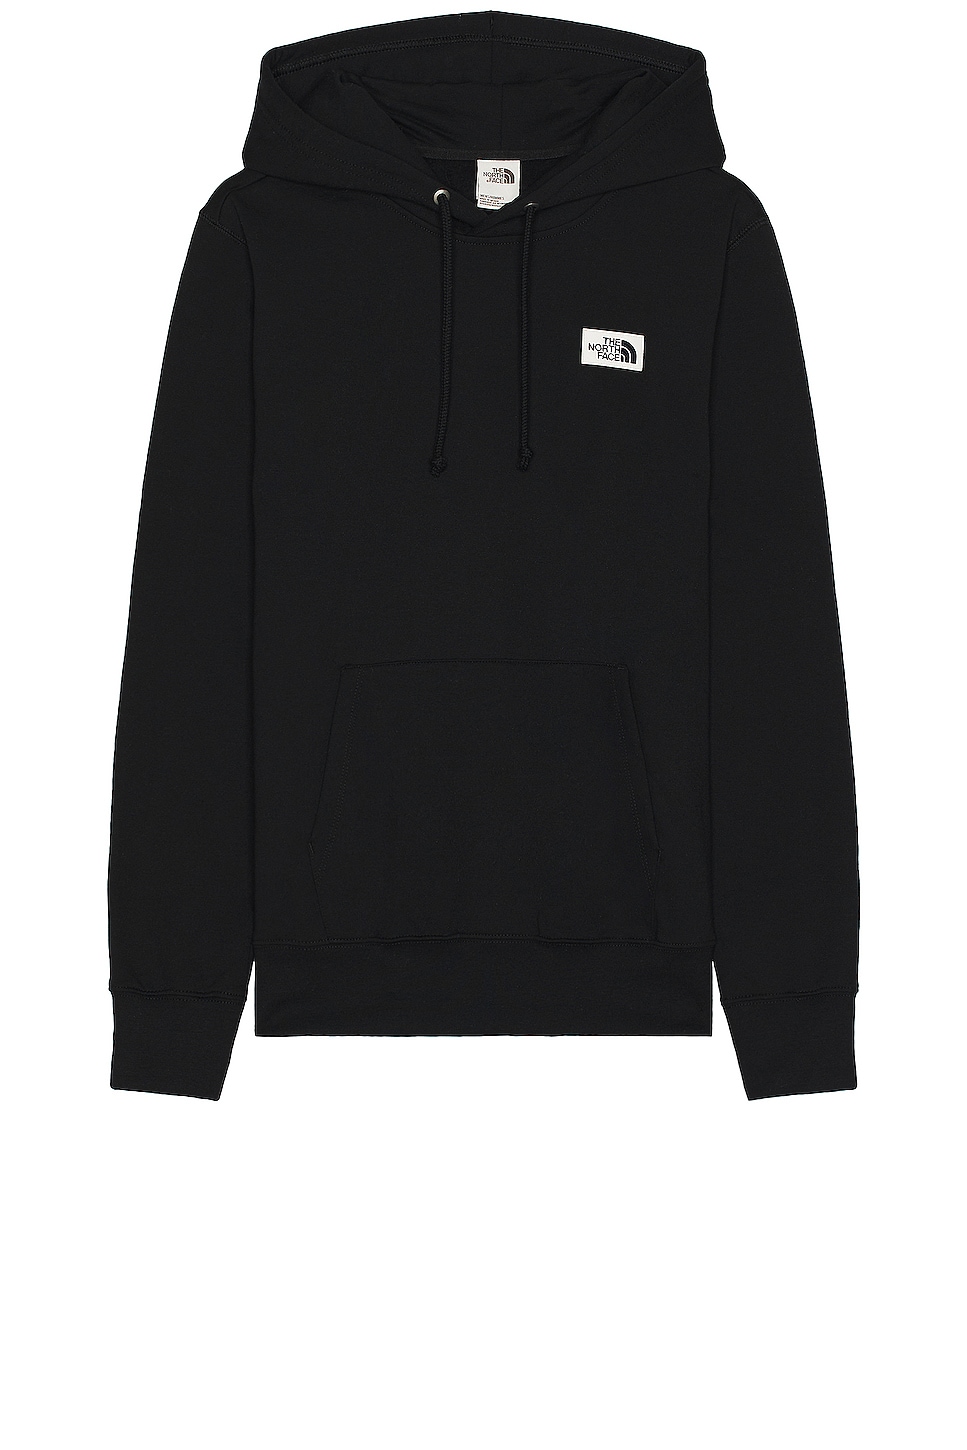 The North Face Heritage Patch Pullover Hoodie in Tnf Black | FWRD